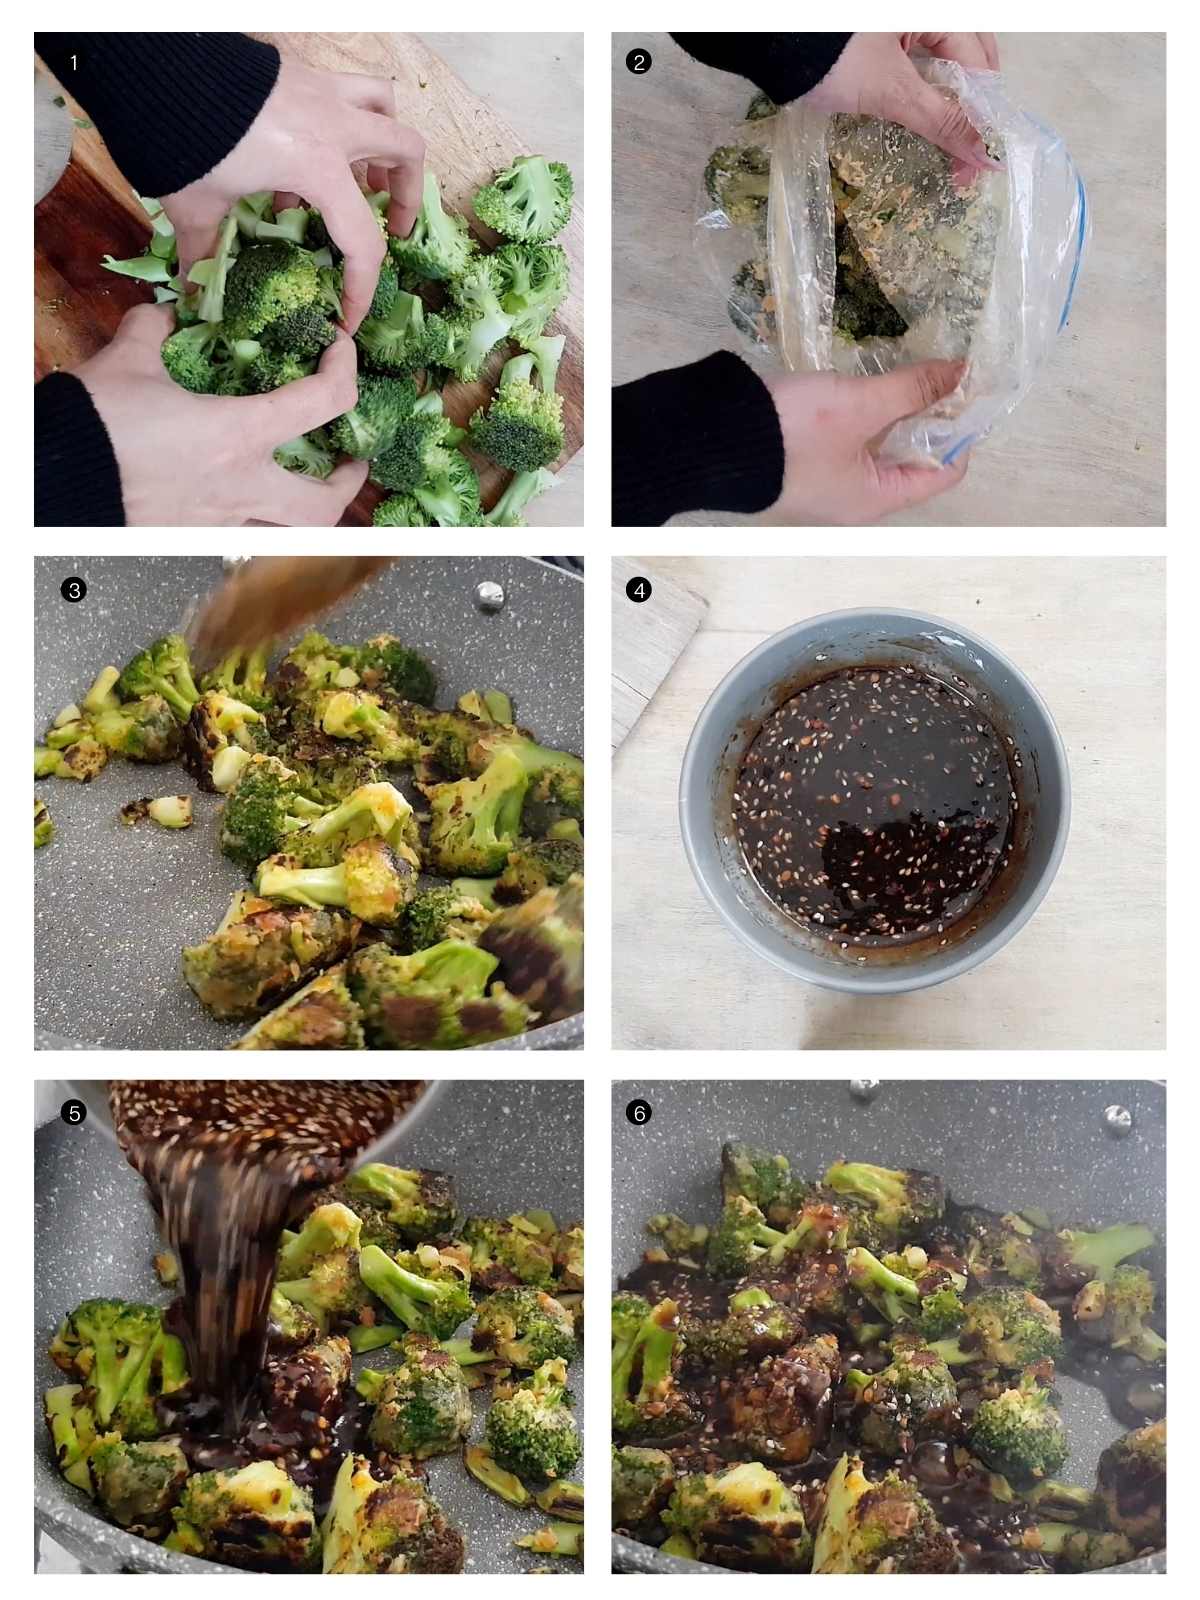 How to make broccoli with garlic sauce step by step process